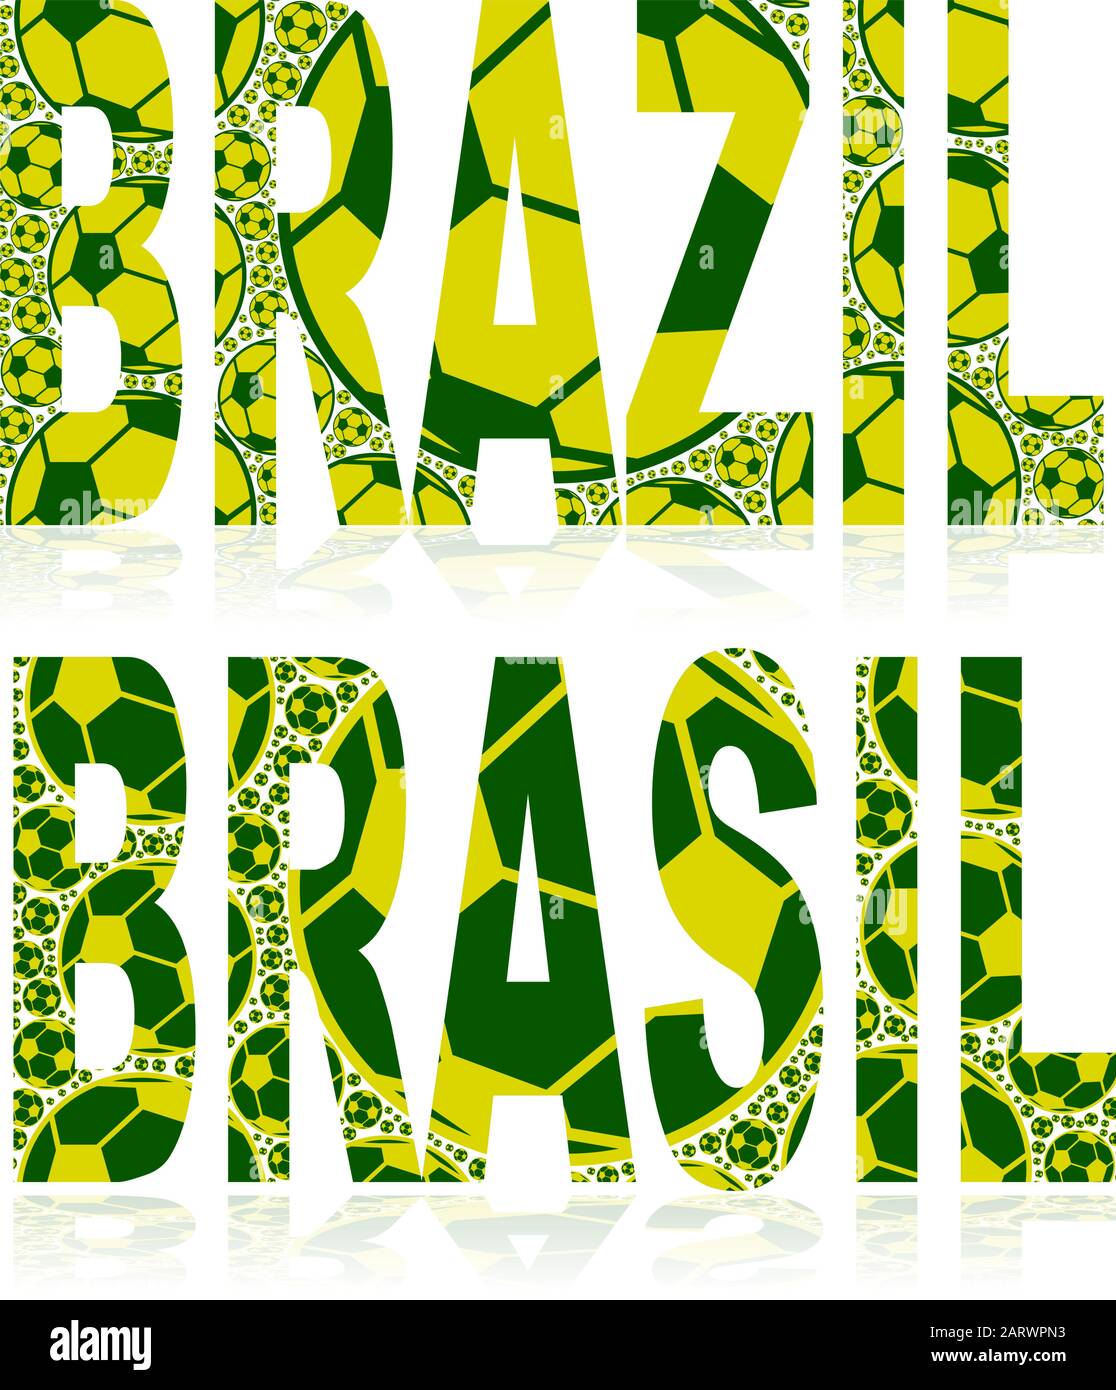 Concept illustration showing the word Brazil (with its equivalent Brasil in the country's Portuguese language) made up of green and yellow soccer ball Stock Vector